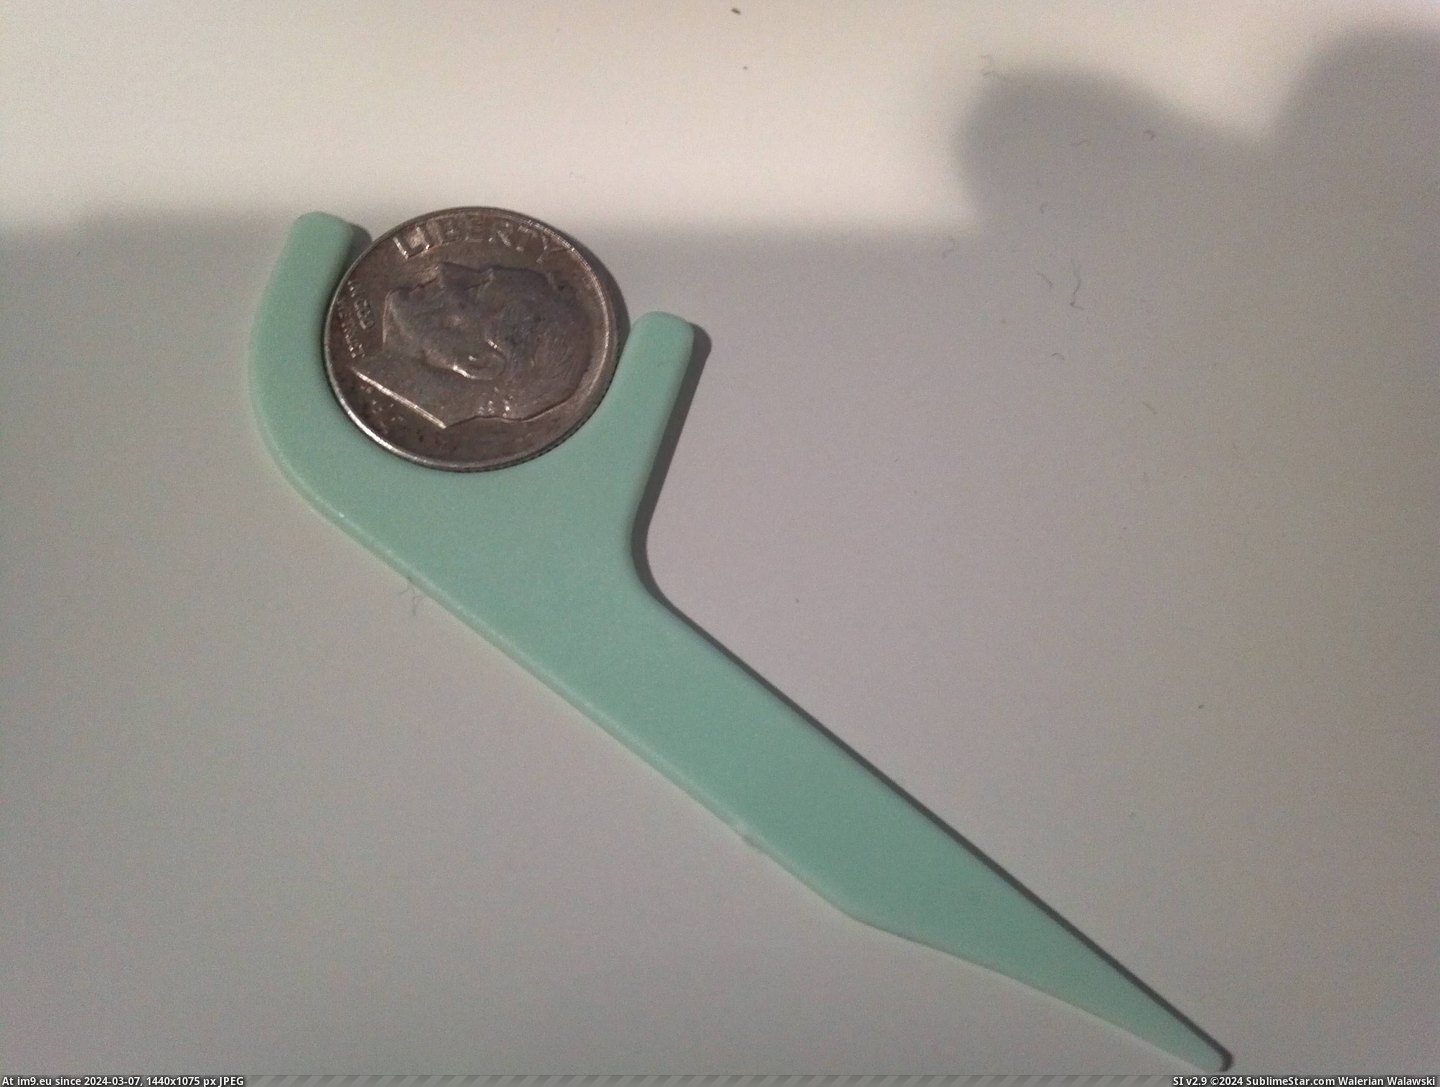 #Pick #Perfectly #Dime #Floss #Curvature #Fits #Dental [Mildlyinteresting] A dime fits perfectly in the curvature of this dental floss pick Pic. (Obraz z album My r/MILDLYINTERESTING favs))